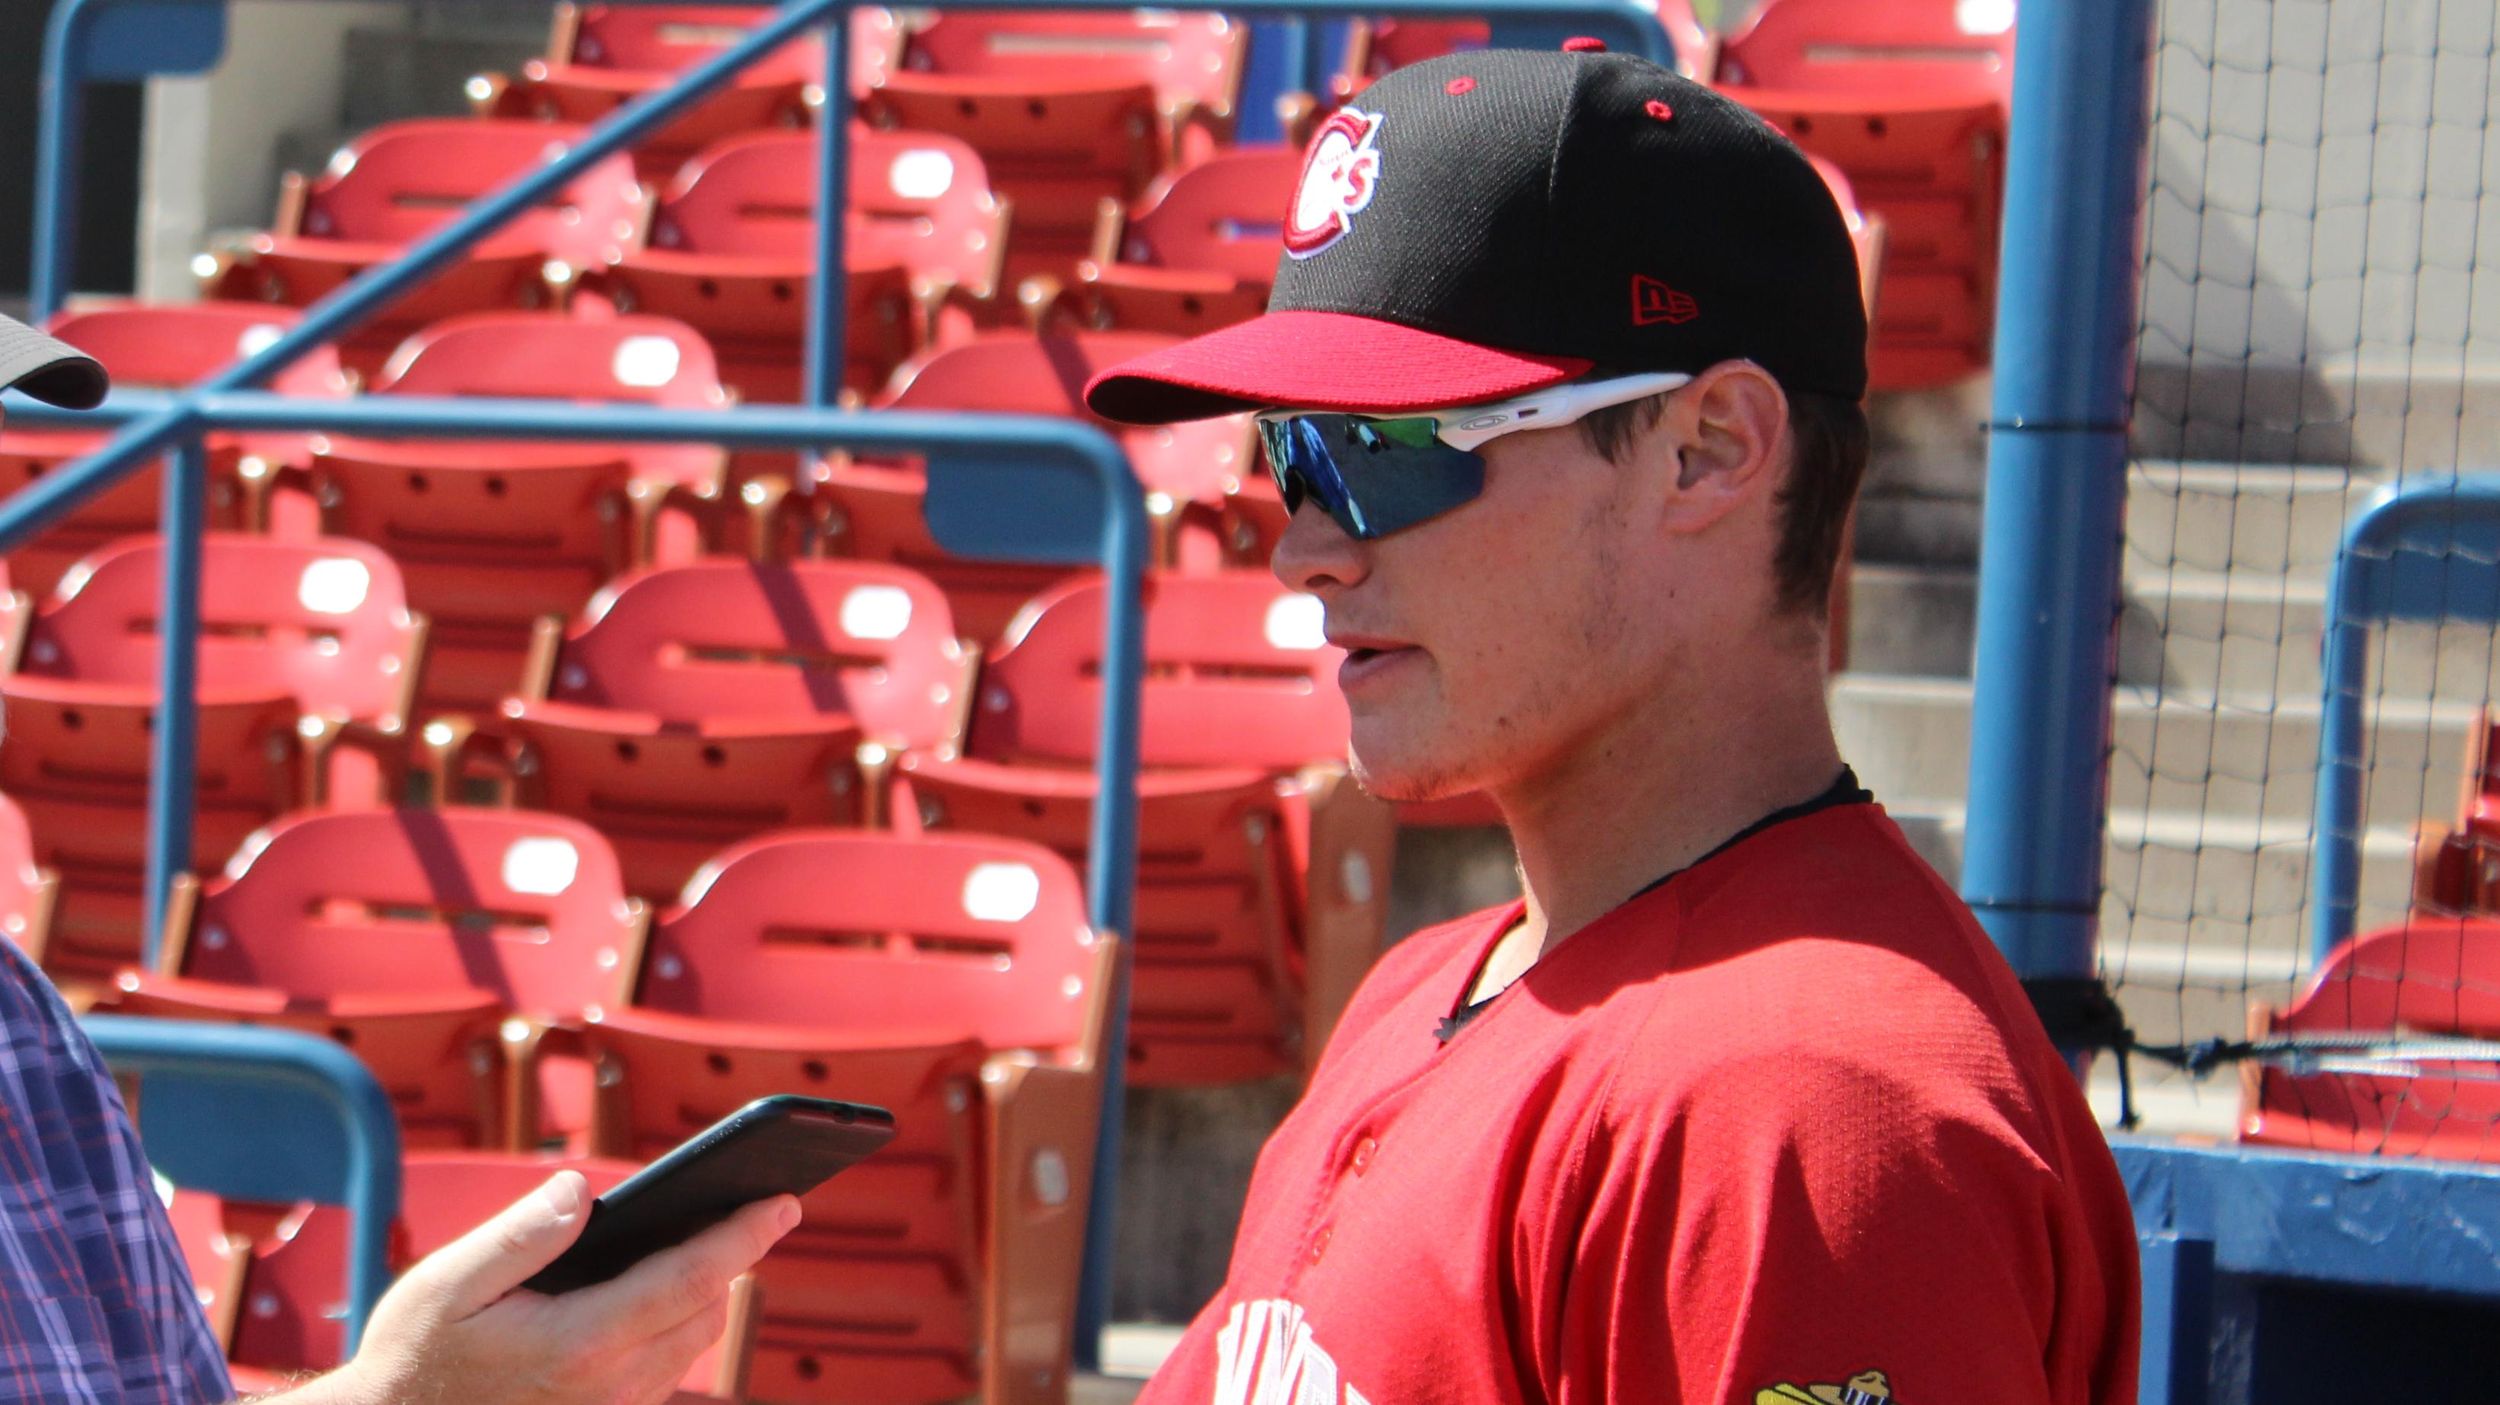 Coaches Corner: Taking a lead with Jeff Conine